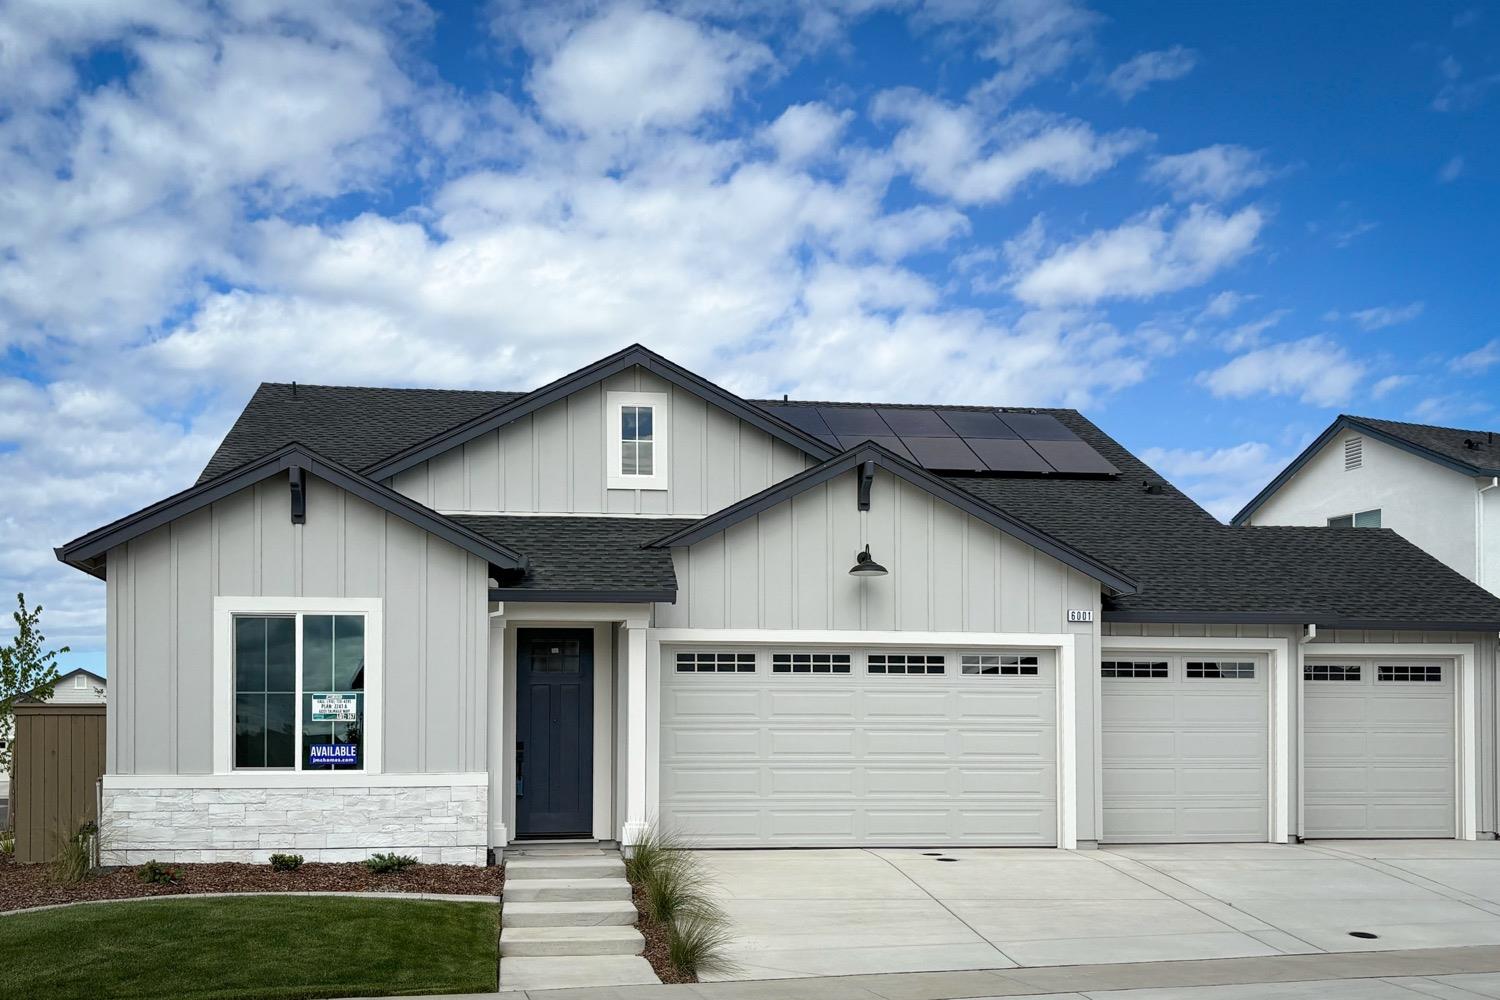 Photo of 6001 Talmage Wy in Roseville, CA